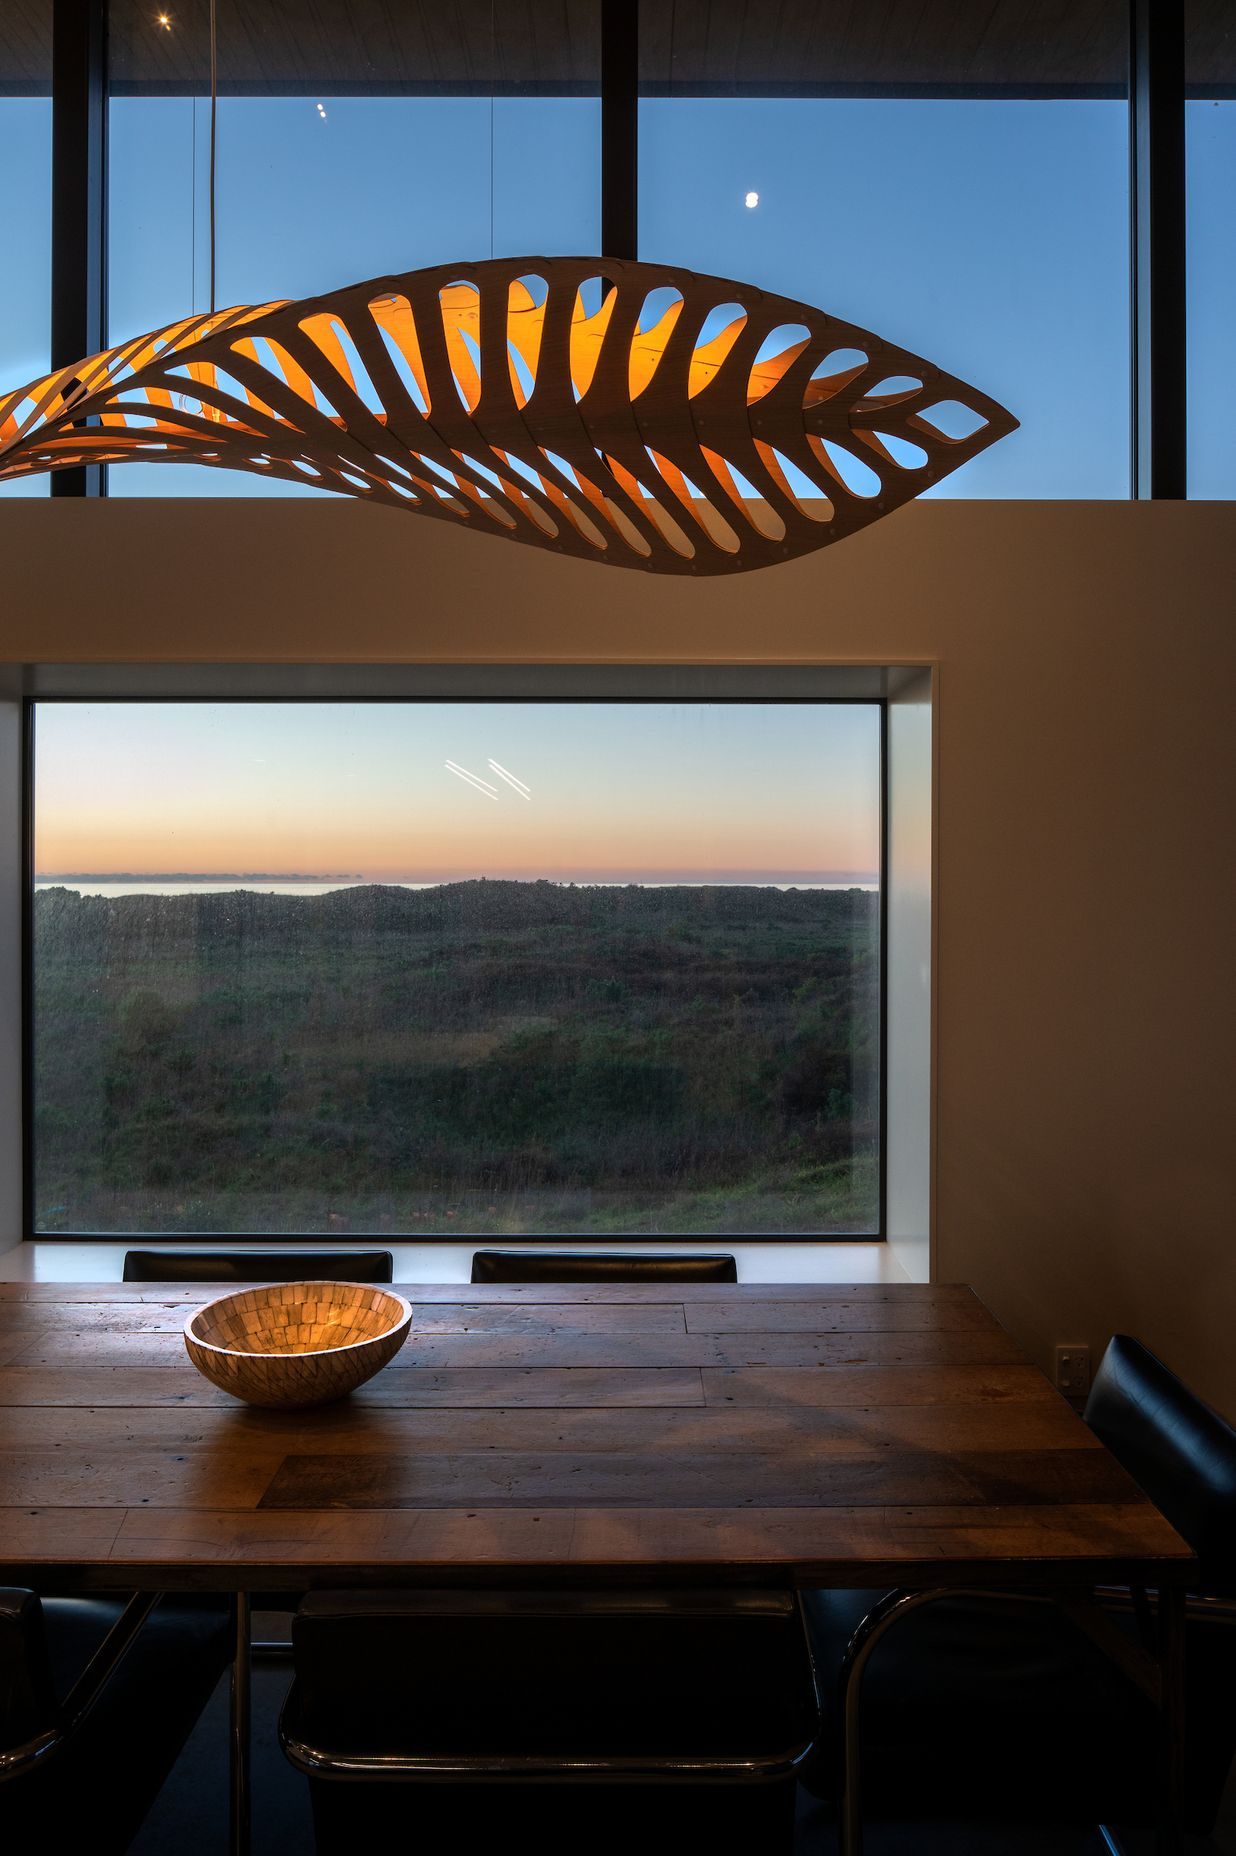 The Future House – can advanced lighting improve our wellbeing?